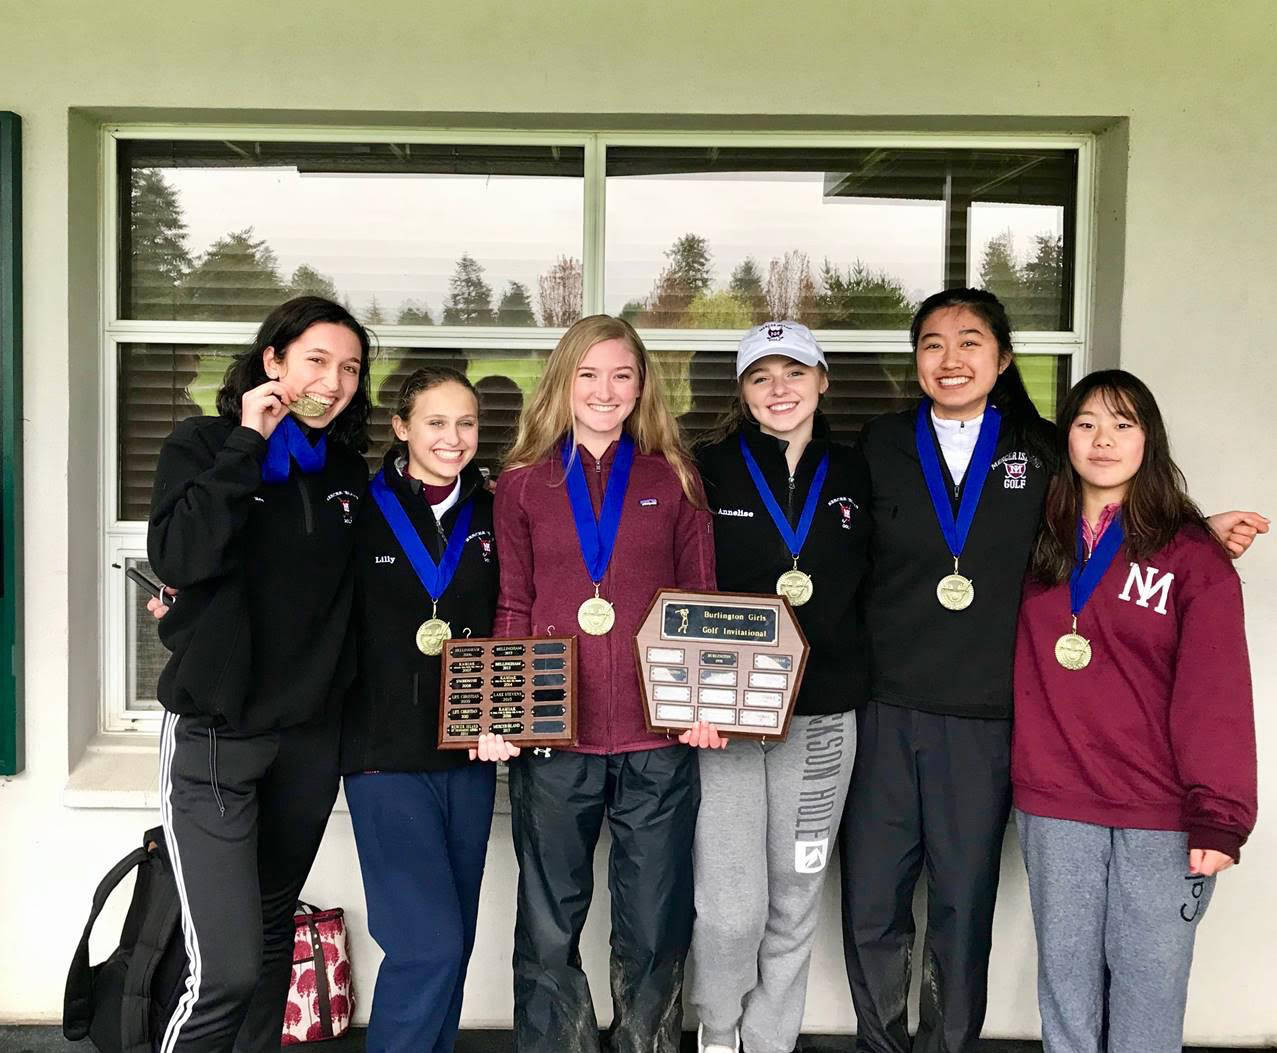 Photo courtesy of Billy Pruchno                                The Mercer Island Islanders girls golf team captured first place at the Burlington Invitational golf tournament on April 16. The Islanders, who compiled 355 total points (low score wins in golf) edged out second place Sammamish by 28 strokes. Mercer Island golfers Ella Warburg and Gihoe Seo tied for second place individually, with each golfer shooting a 79 on the 18-hole course. The Islanders have won all four golf tournaments they’ve competed in during the 2018 season thus far.